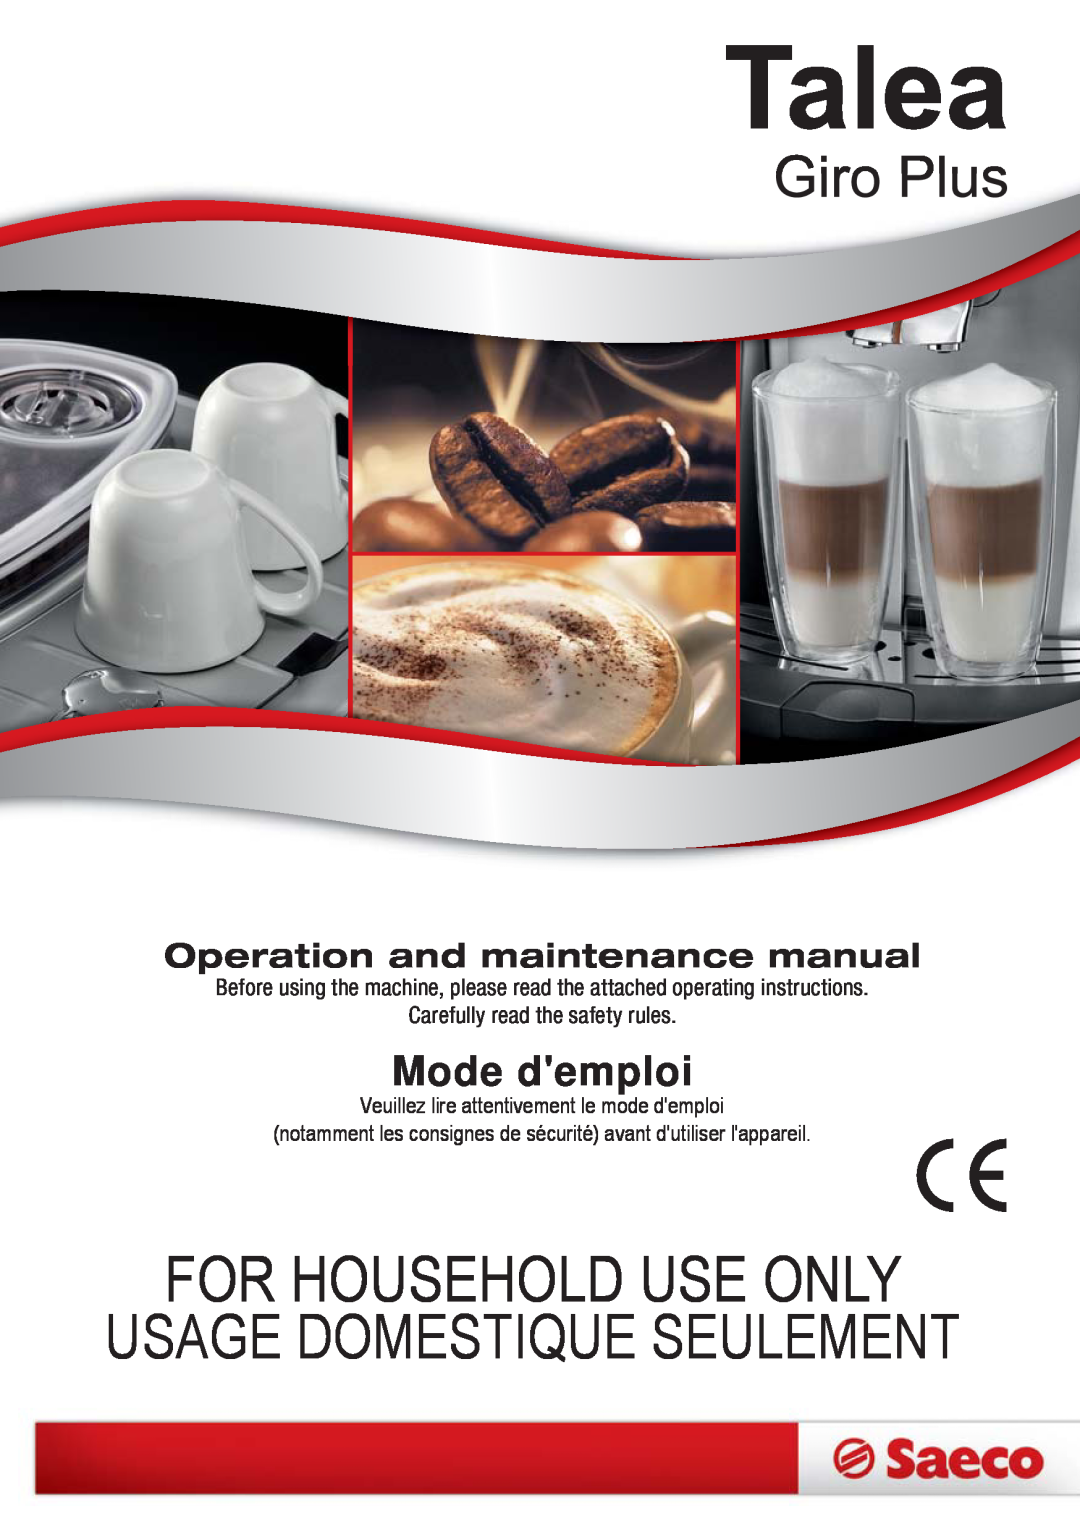 Saeco Coffee Makers SUP032OR, 15001566 manual For Household Use Only, Usage Domestique Seulement, Mode demploi 